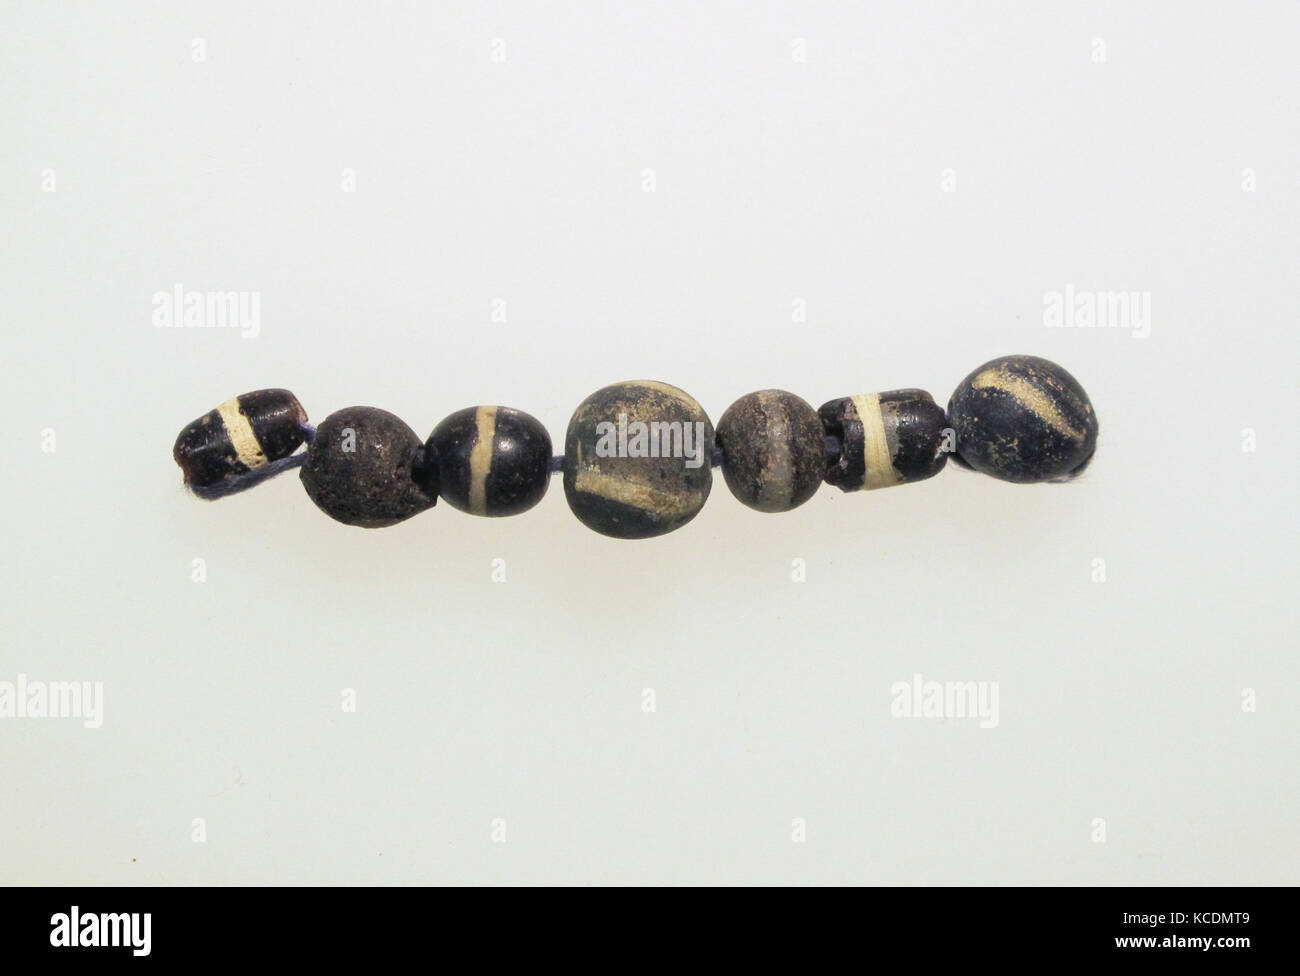 Beads, 7, Roman, Glass, Other: 2 1/2 in. (6.3 cm), Glass Stock Photo